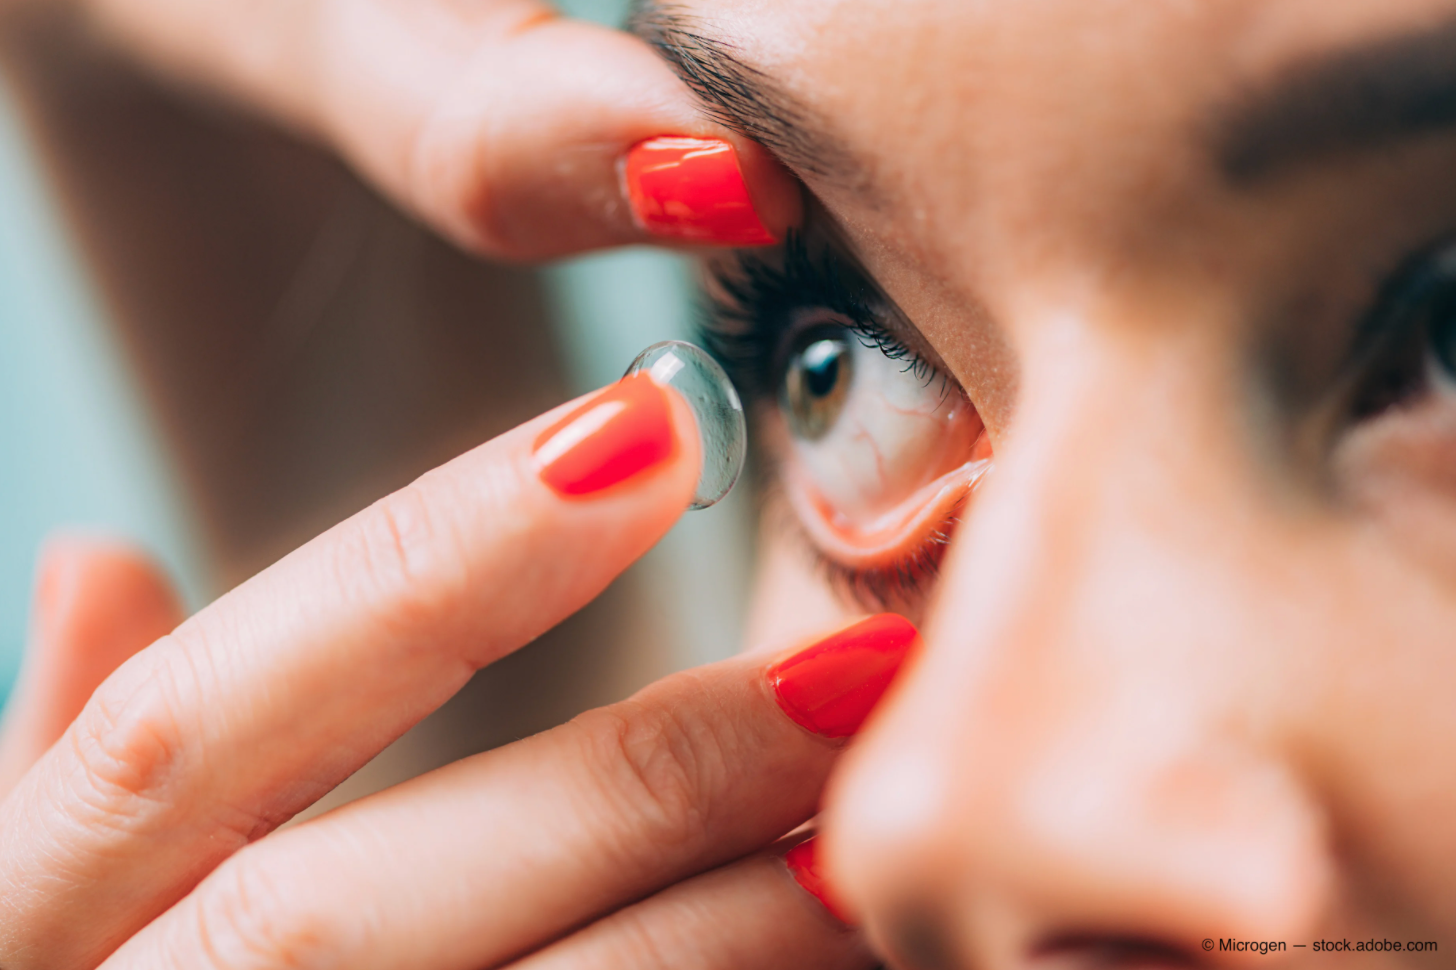 Patients aren't hearing contact lens care information